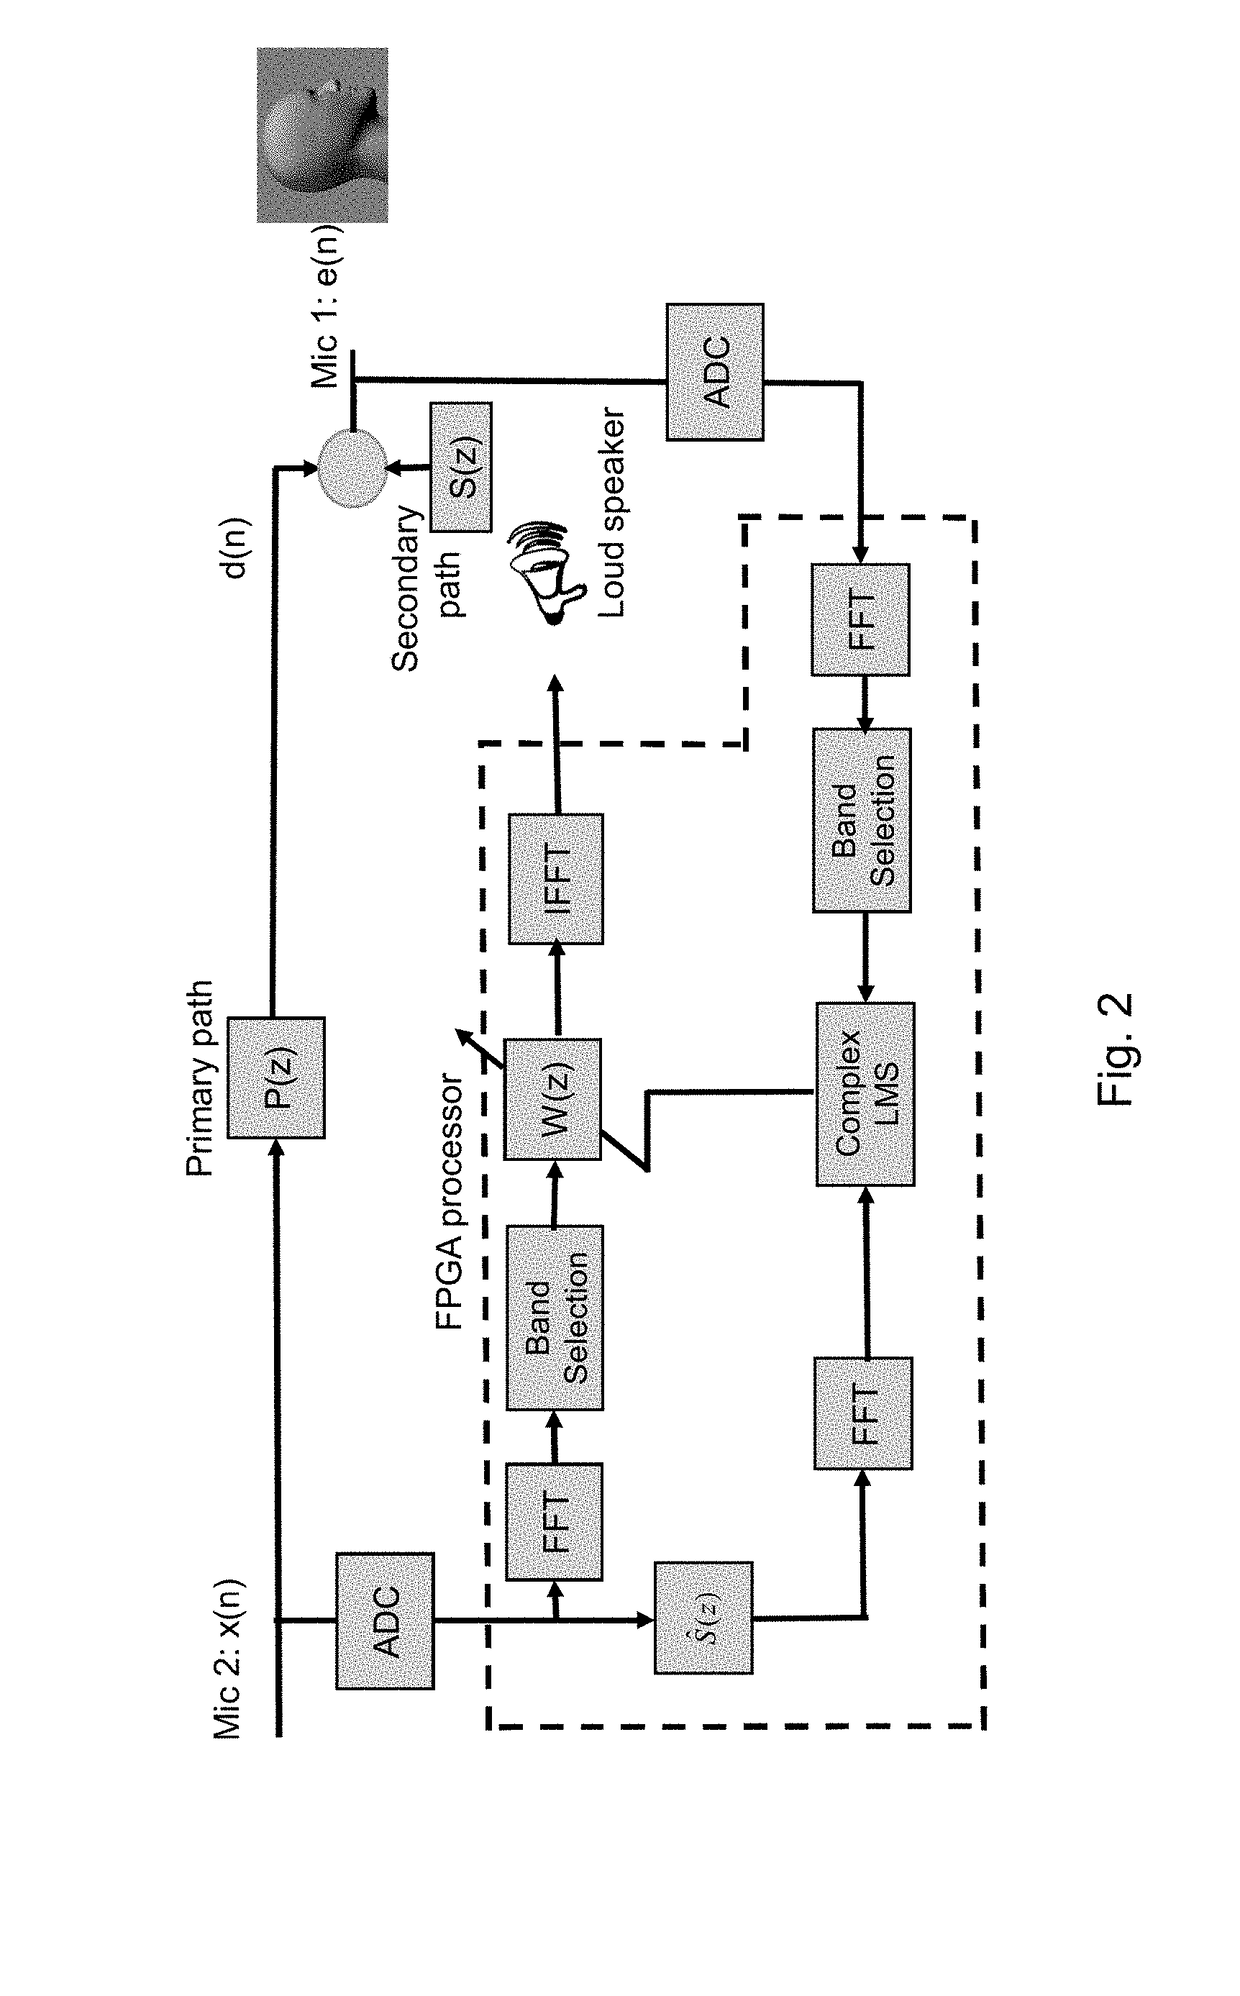 Active noise reduction system for creating a quiet zone